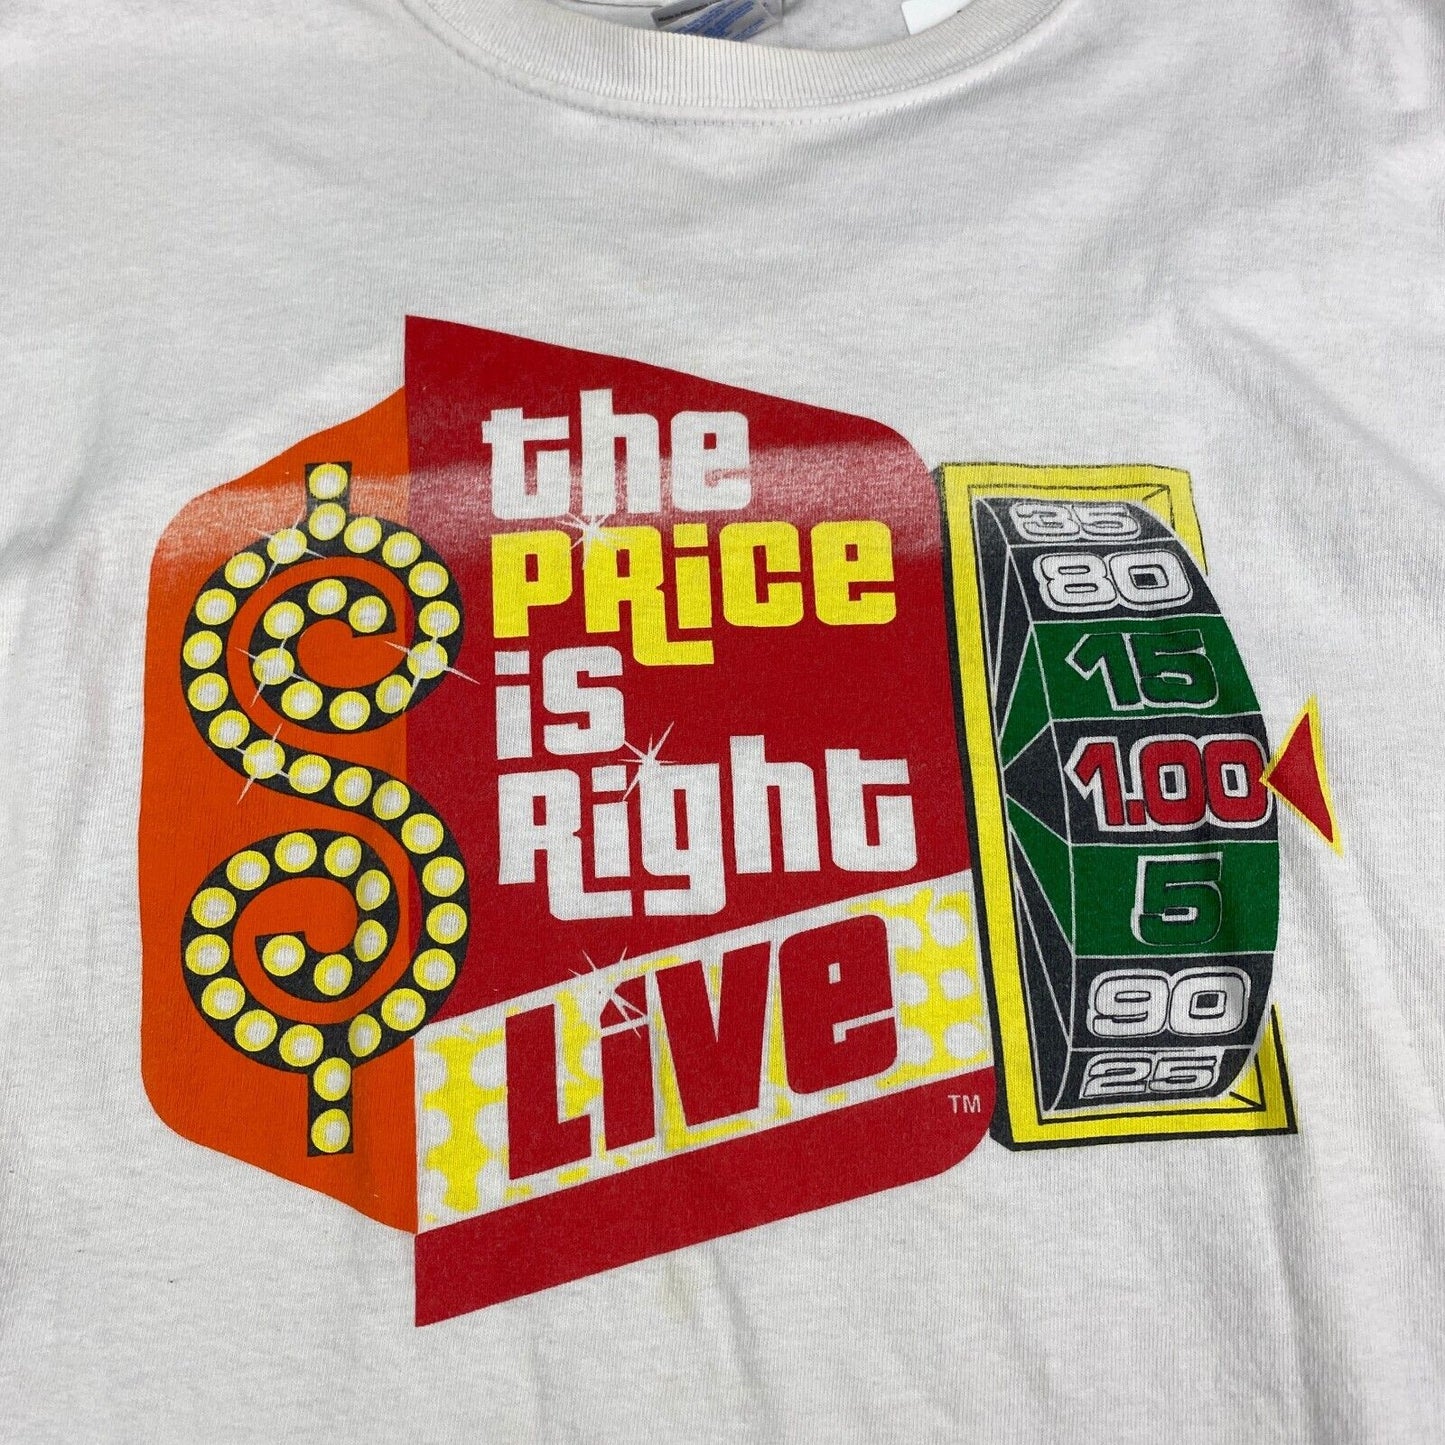 VINTAGE The Price Is Right Live White T-Shirt sz XL Adult